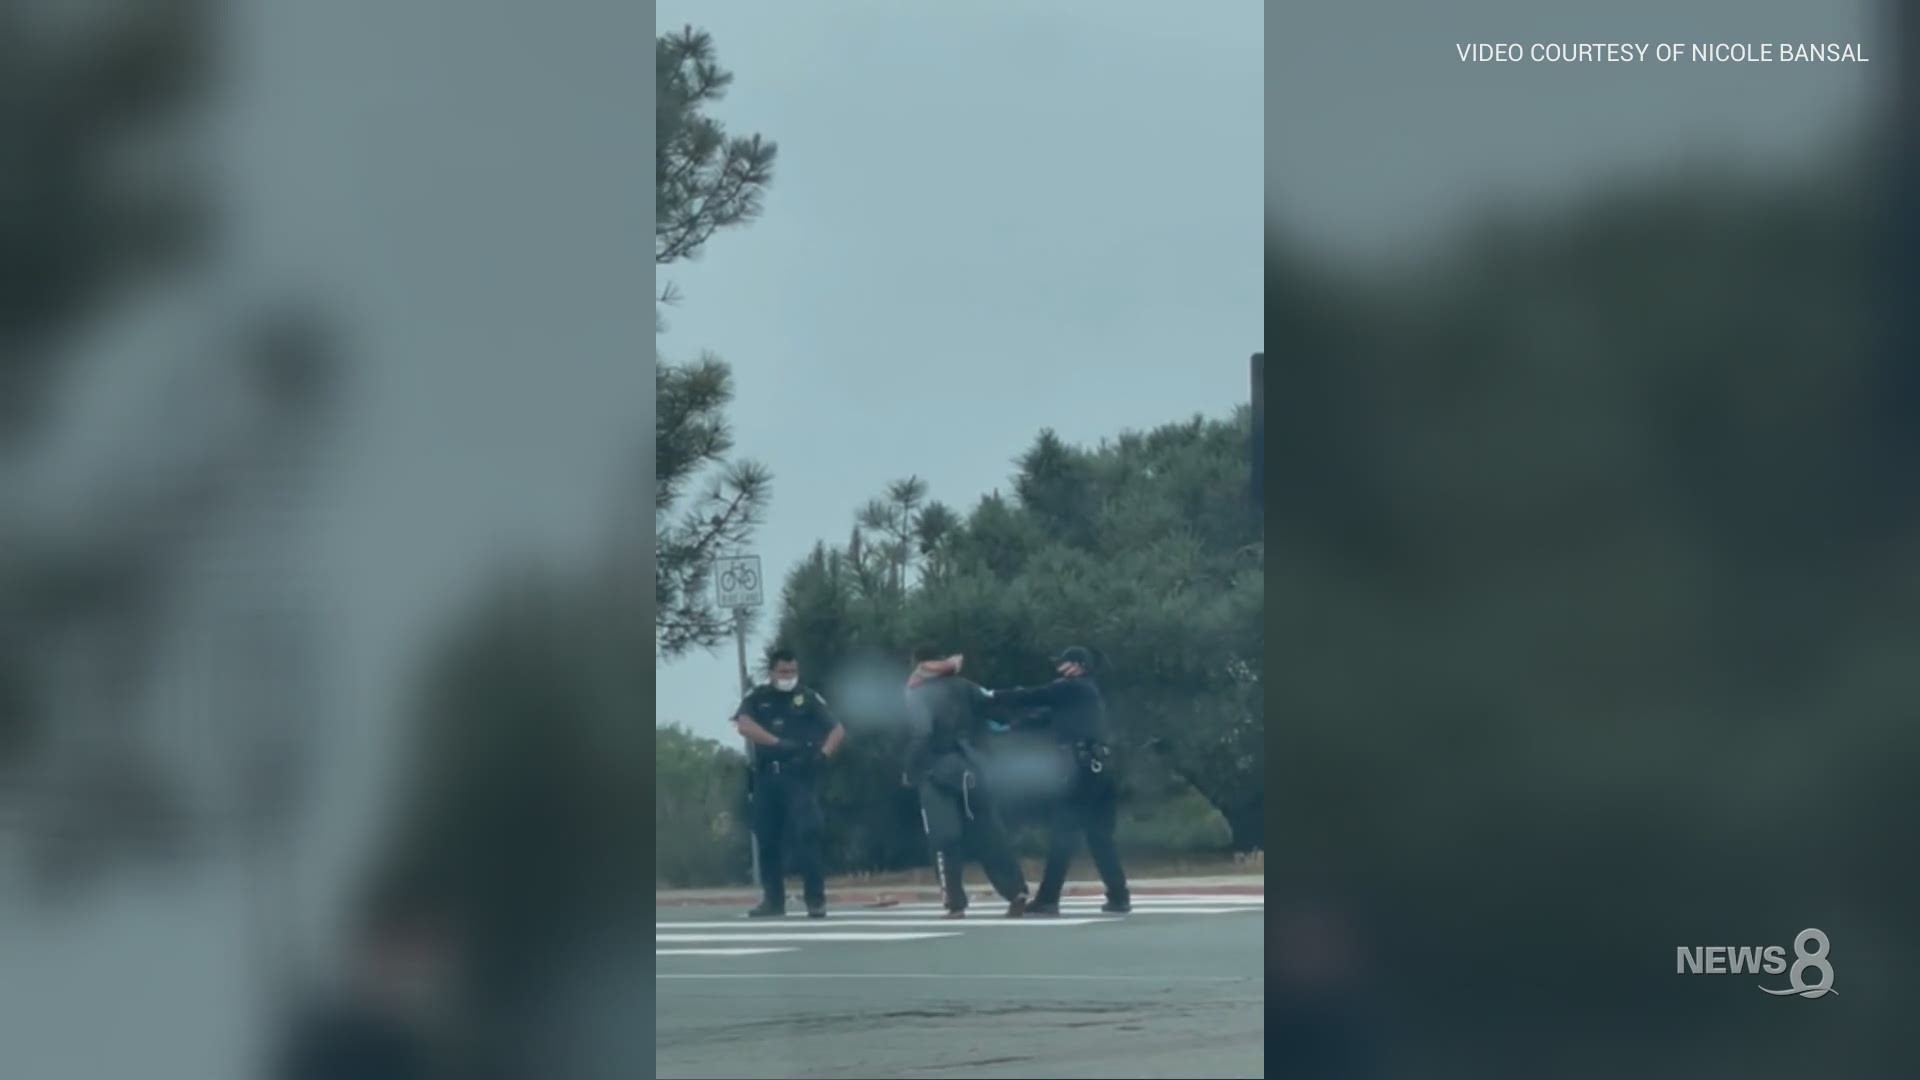 An internal investigation is underway after a video on social media surfaced of an arrest during which SDPD officers tackled and repeatedly punched a man in La Jolla